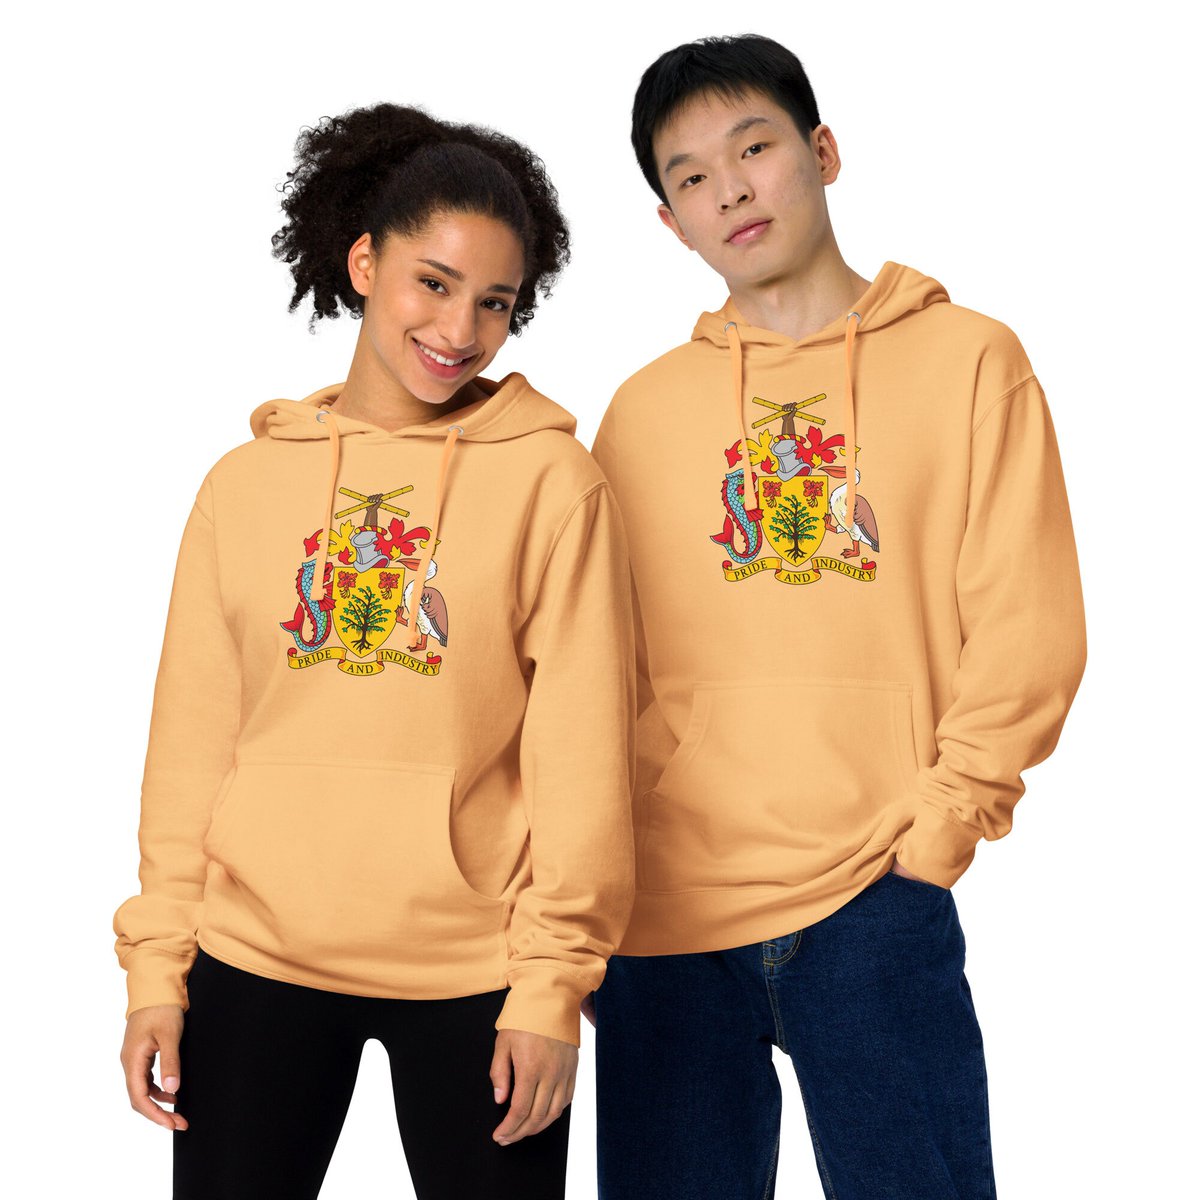 Excited to share the latest addition to my #etsy shop: Barbados court of arms hoodie etsy.me/42VFvYE #streetwear #engagement #thanksgiving #barbados #bajan #reggae #soca #giftformom #giftforher